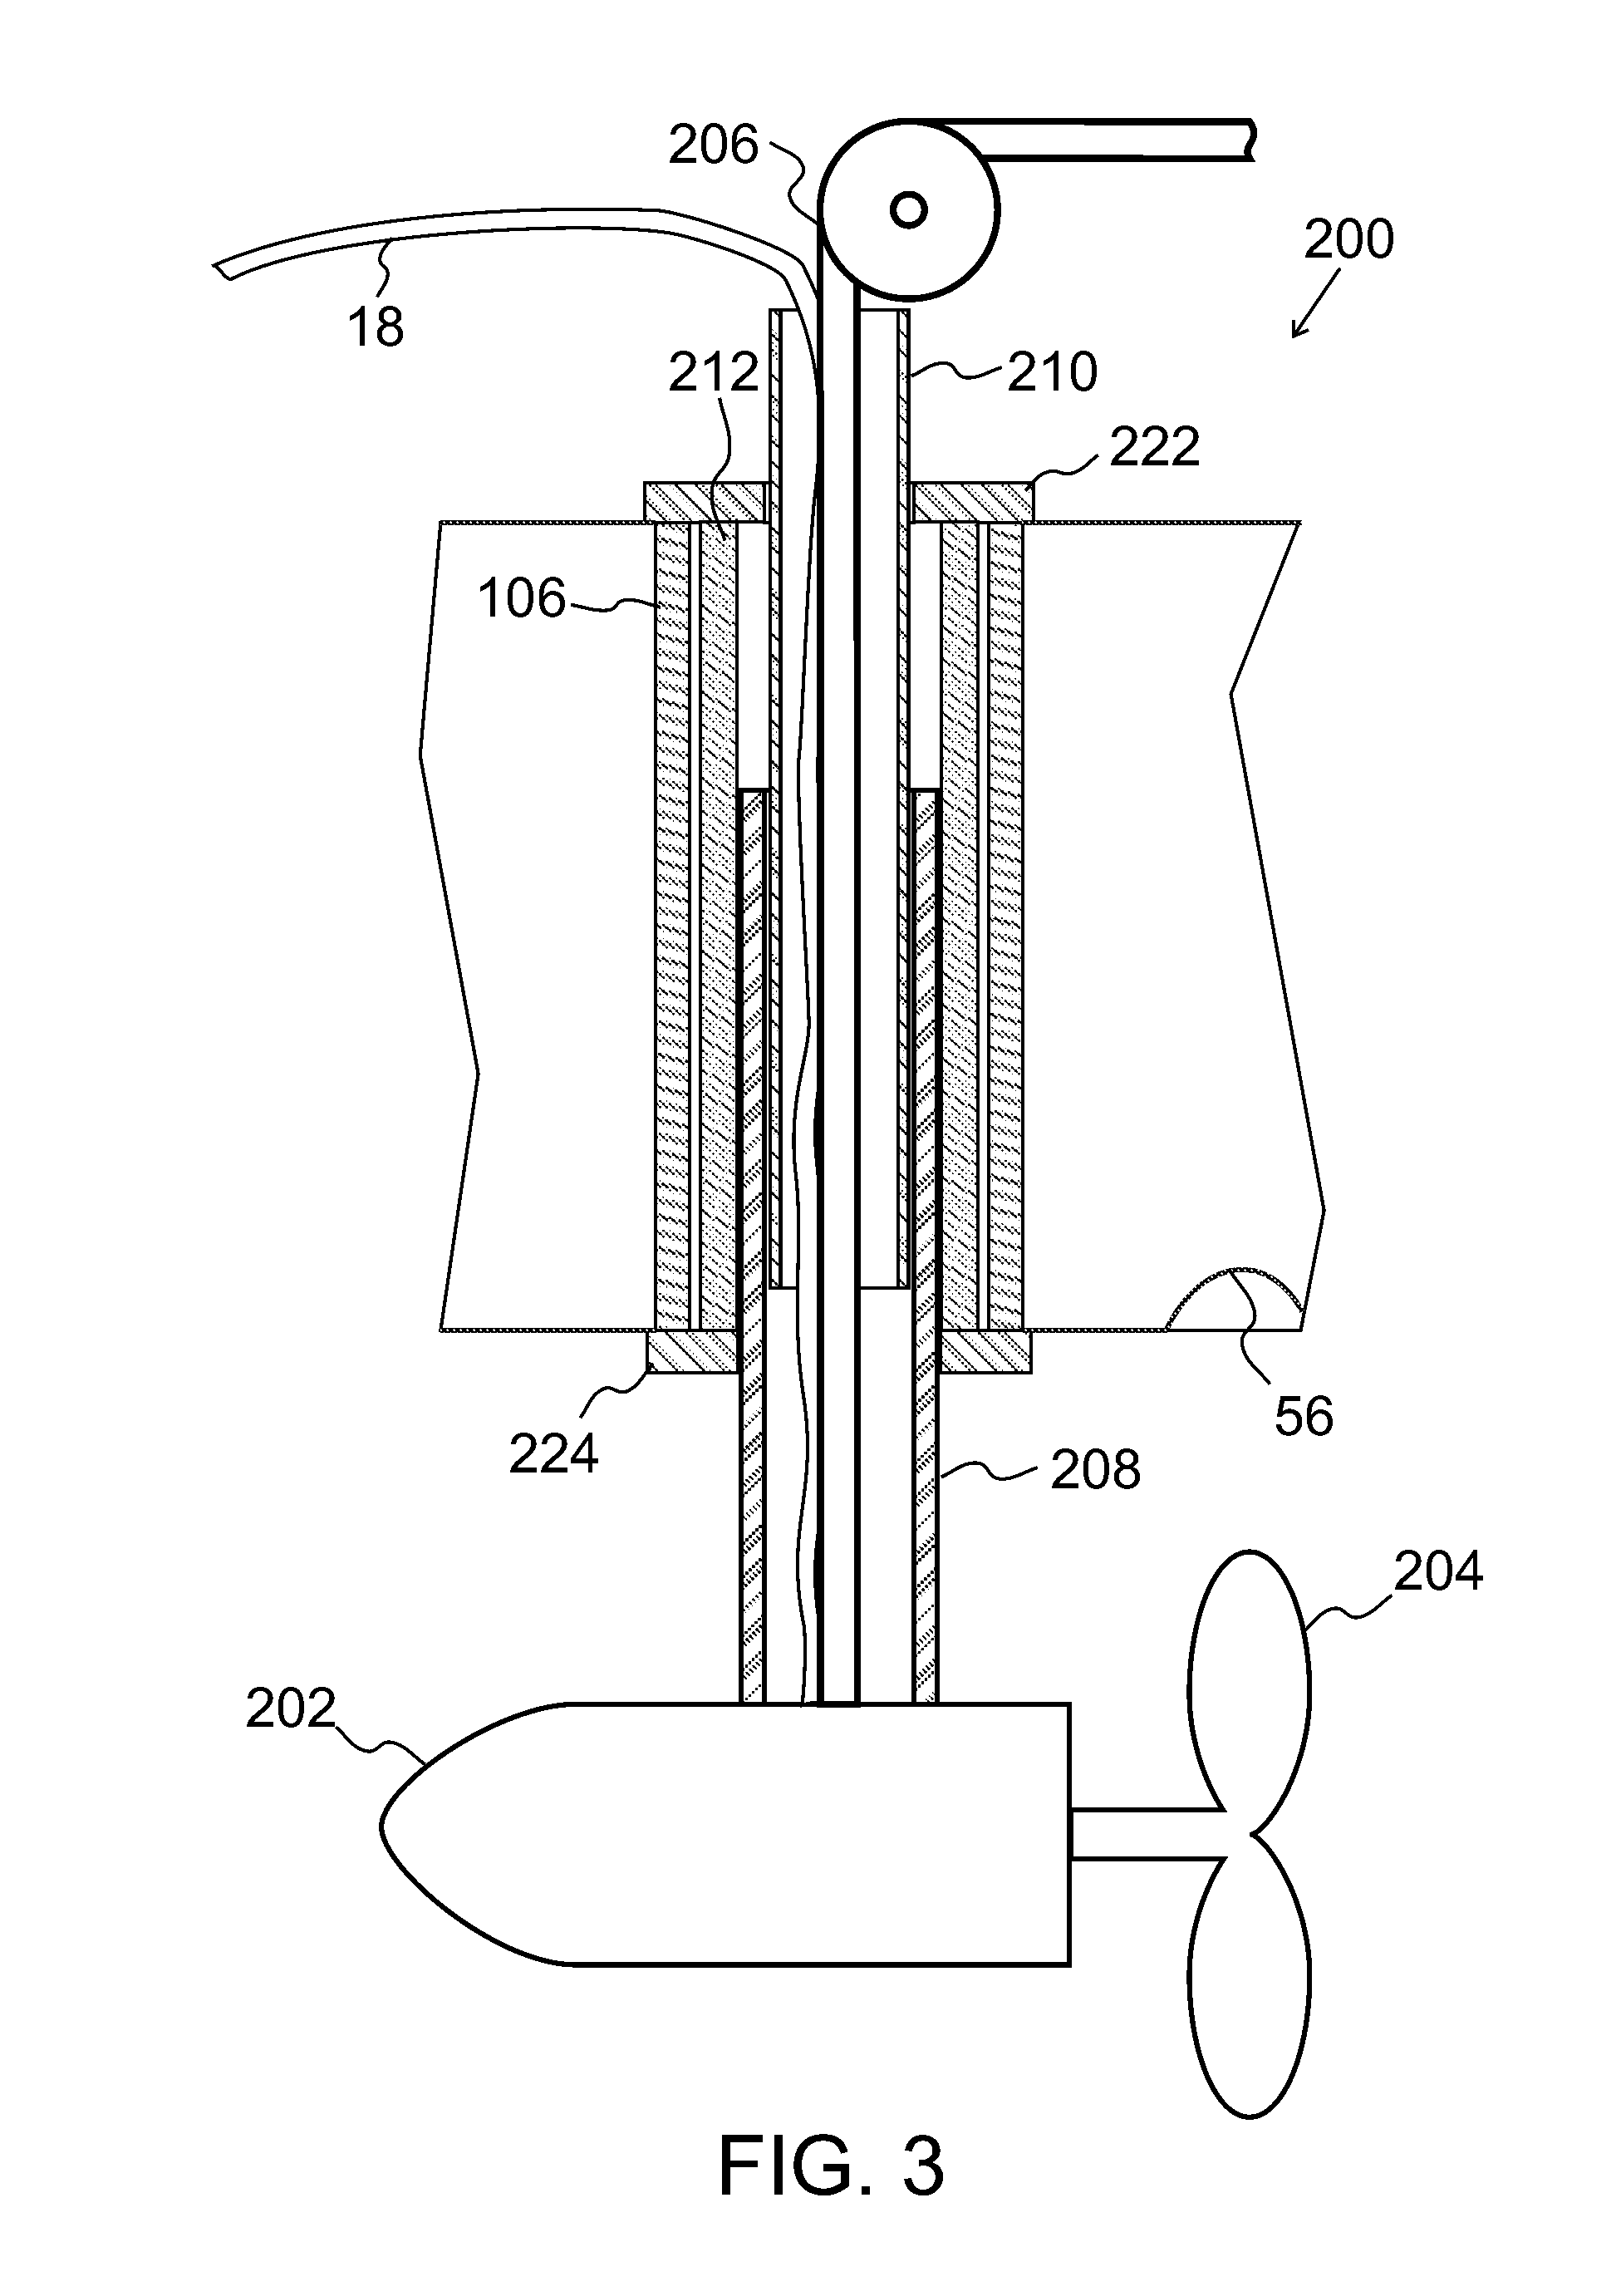 Shallow-draft watercraft propulsion and steering apparatus